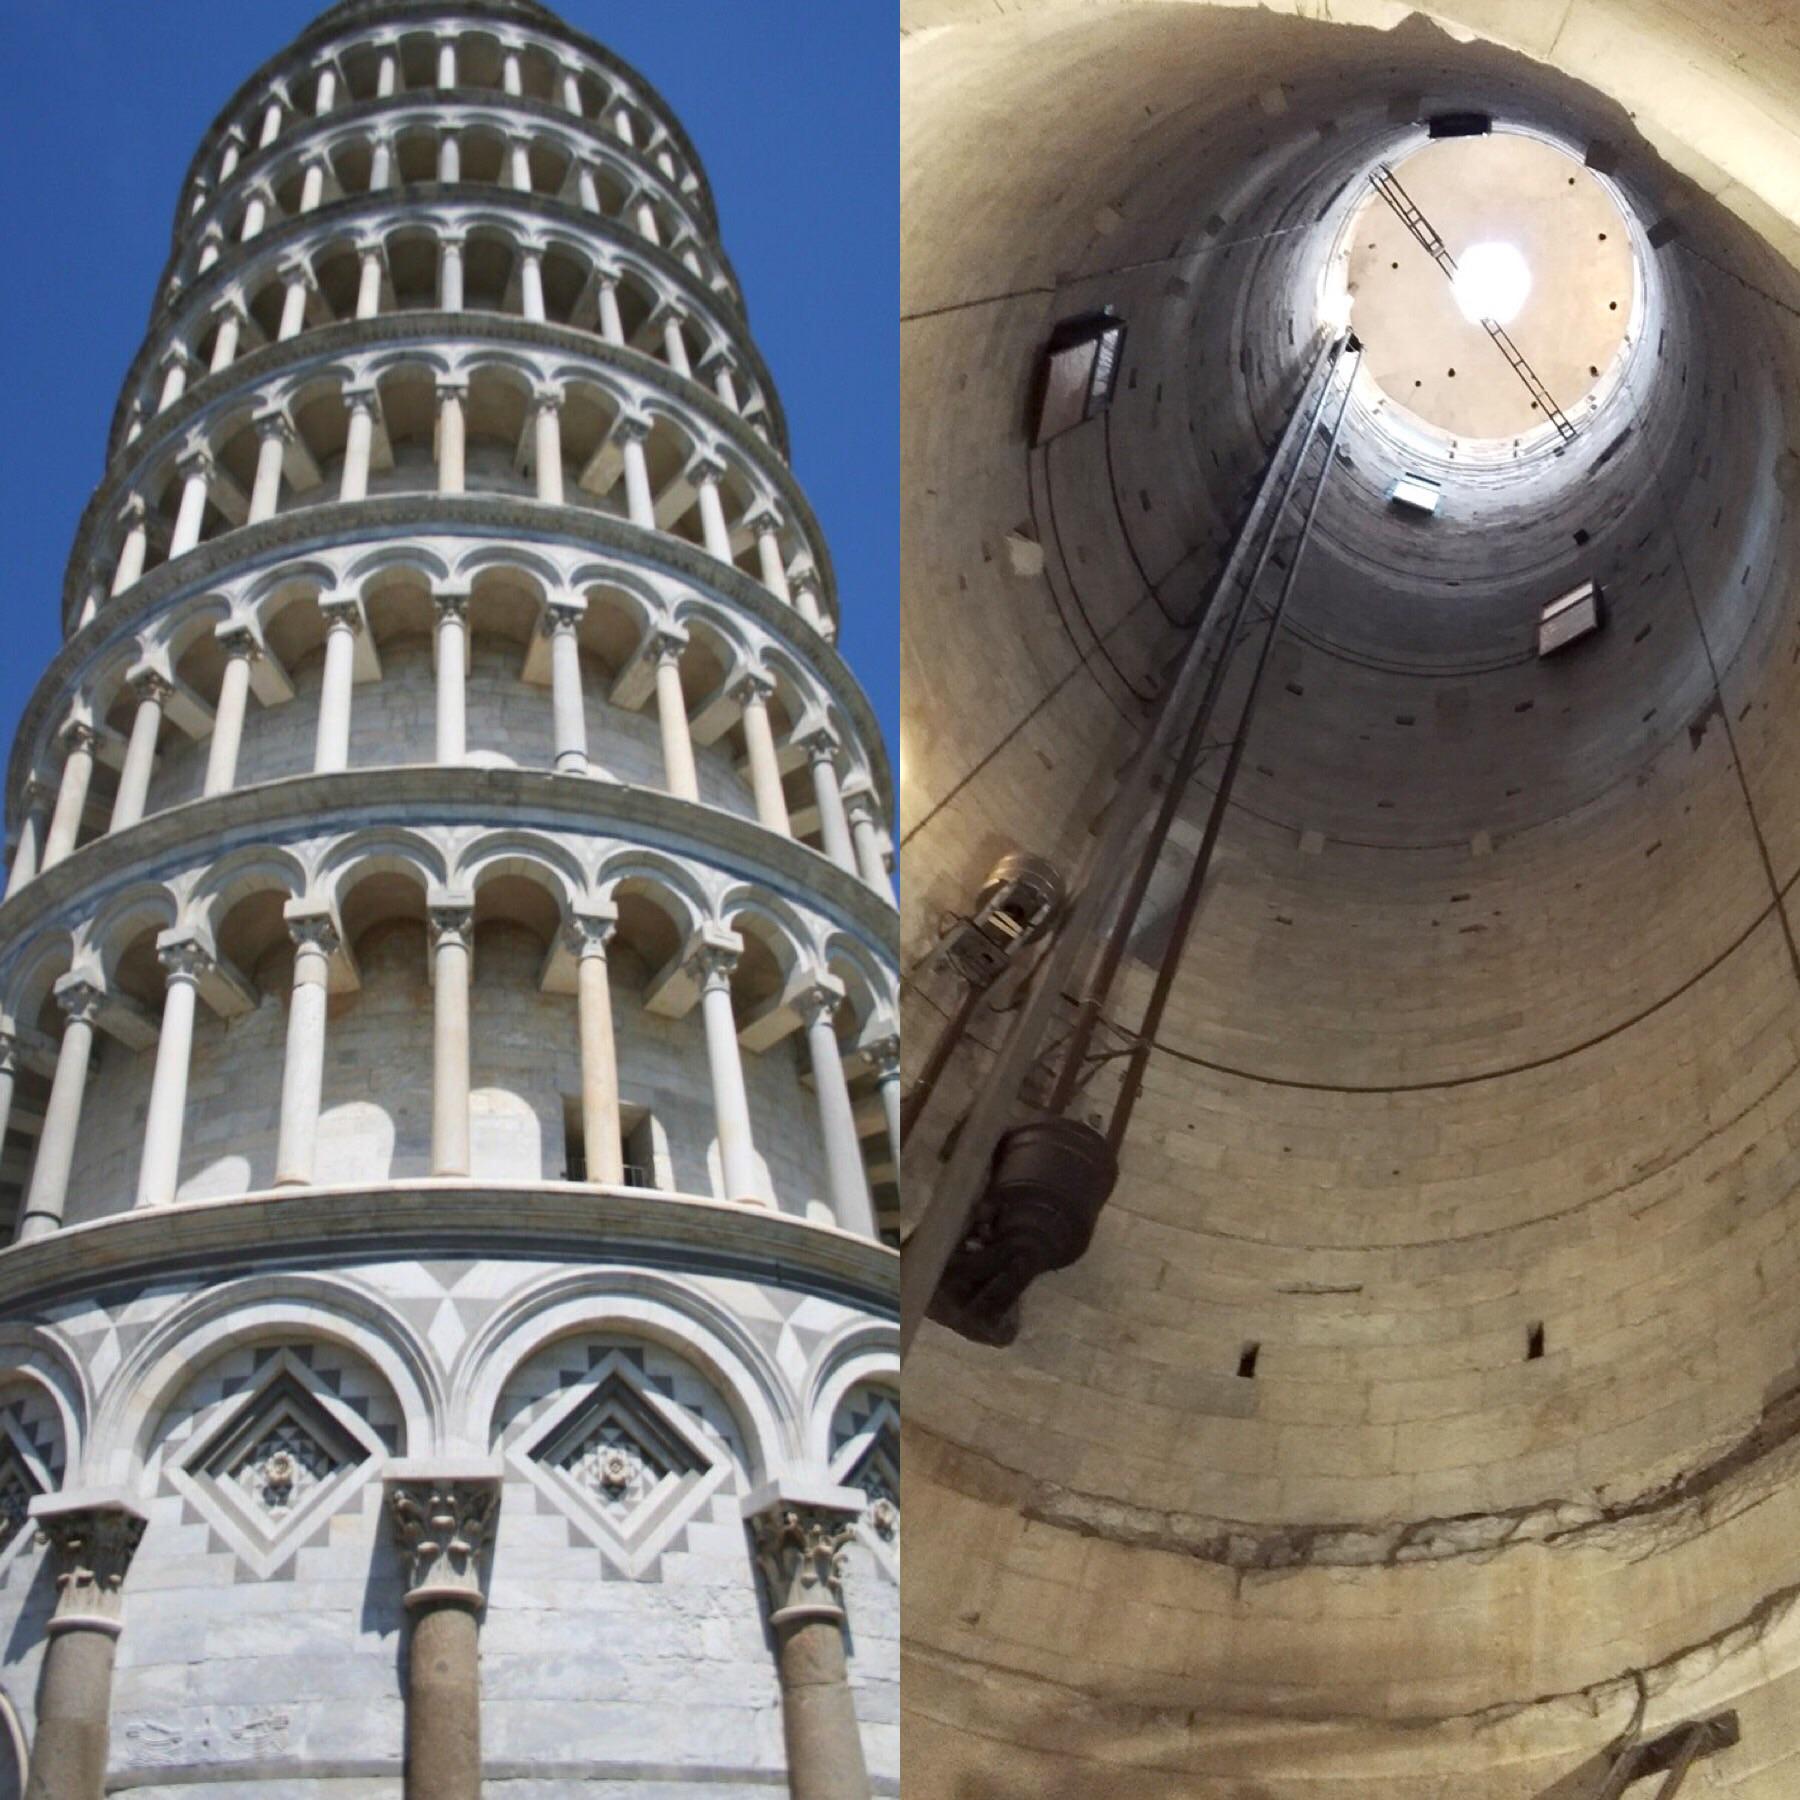 The leaning tower of Pisa is empty on the inside.